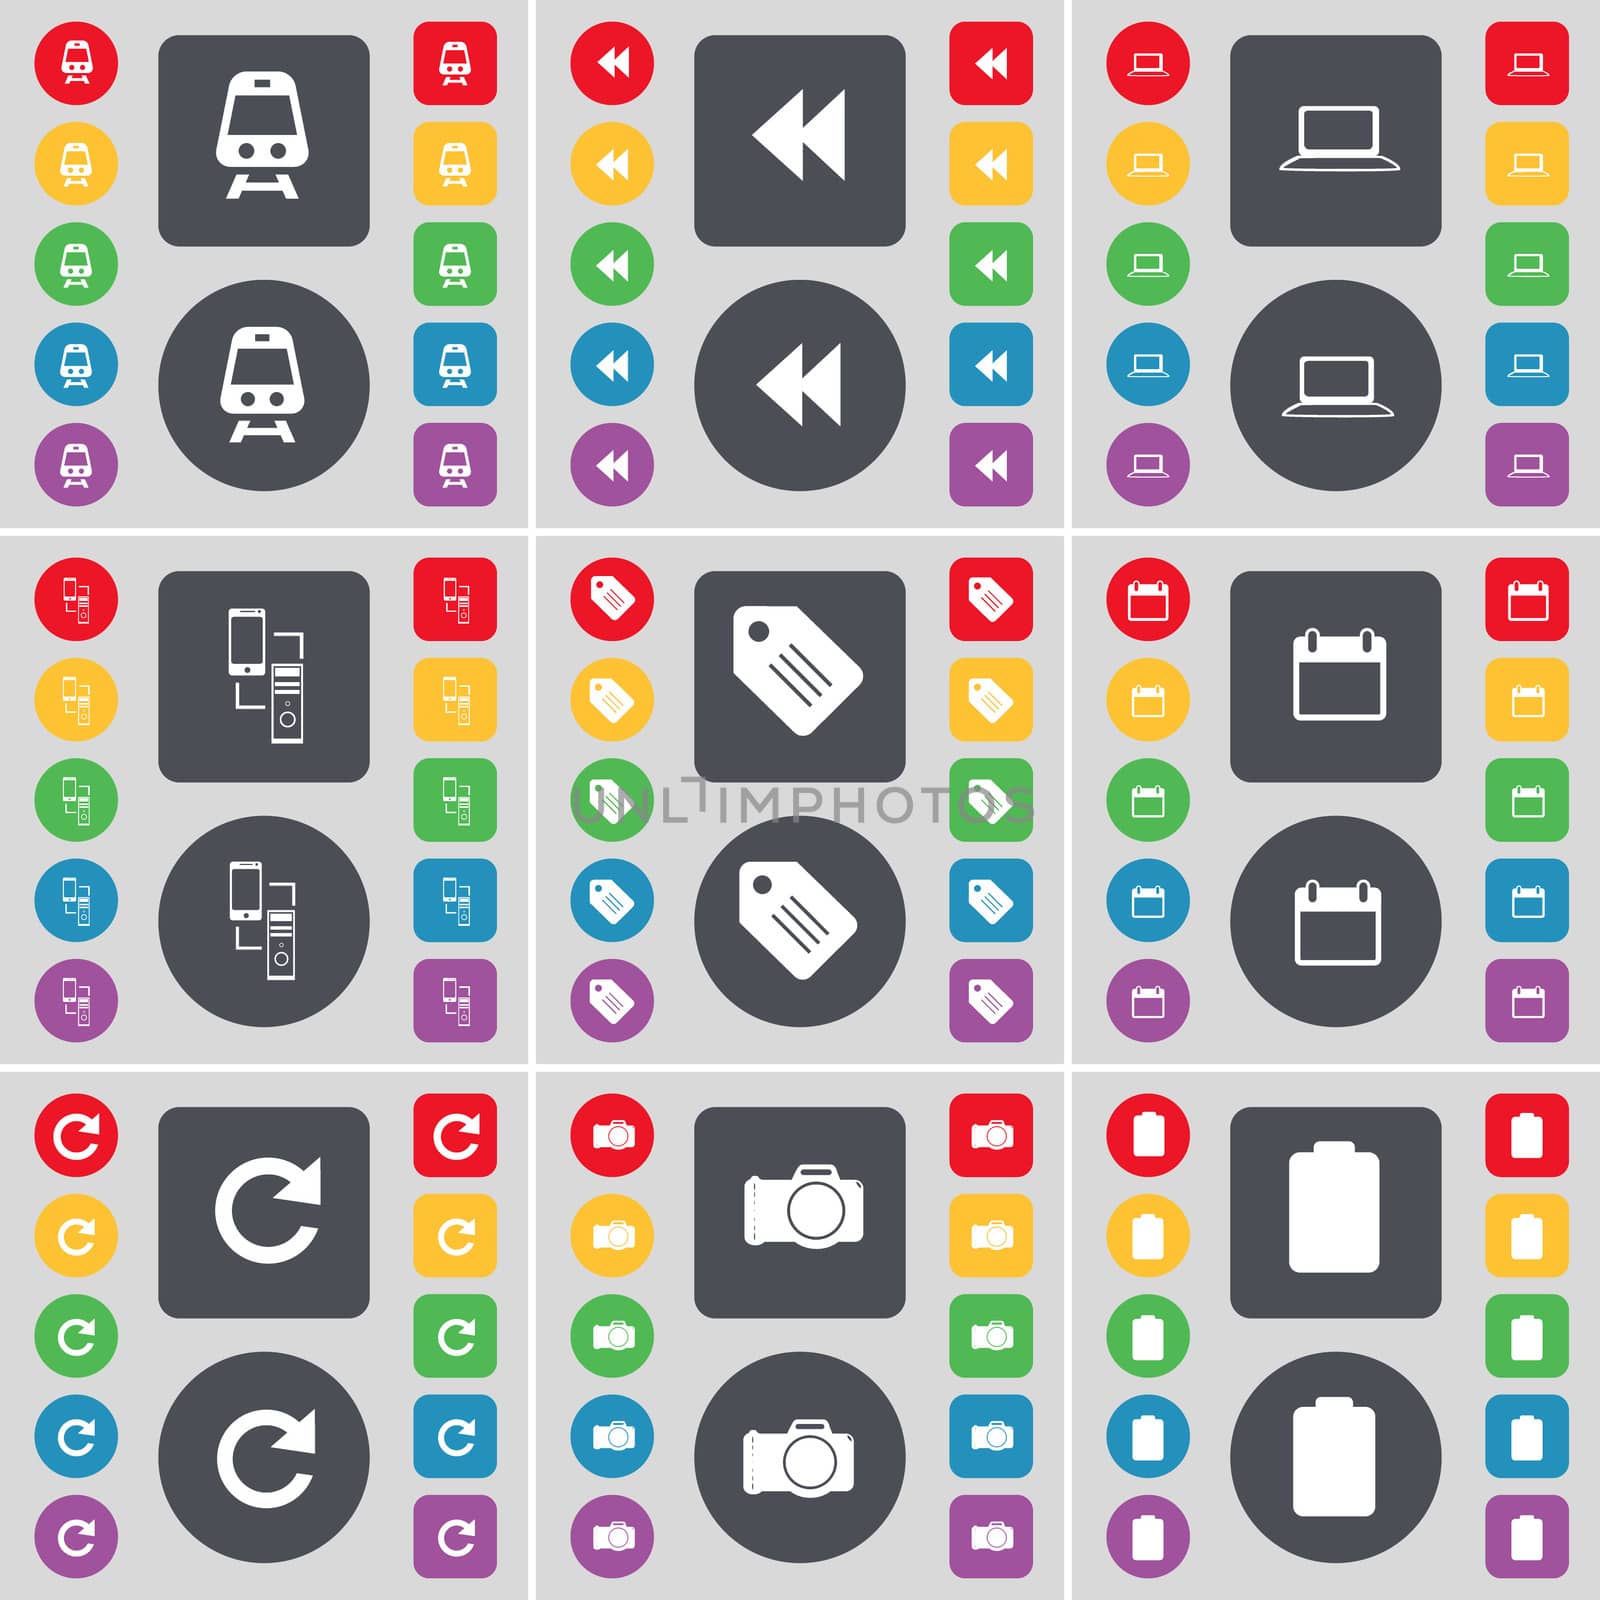 Train, Rewind, Laptop, Information exchange, Tag, Calendar, Reload, Camera, Battery icon symbol. A large set of flat, colored buttons for your design. illustration